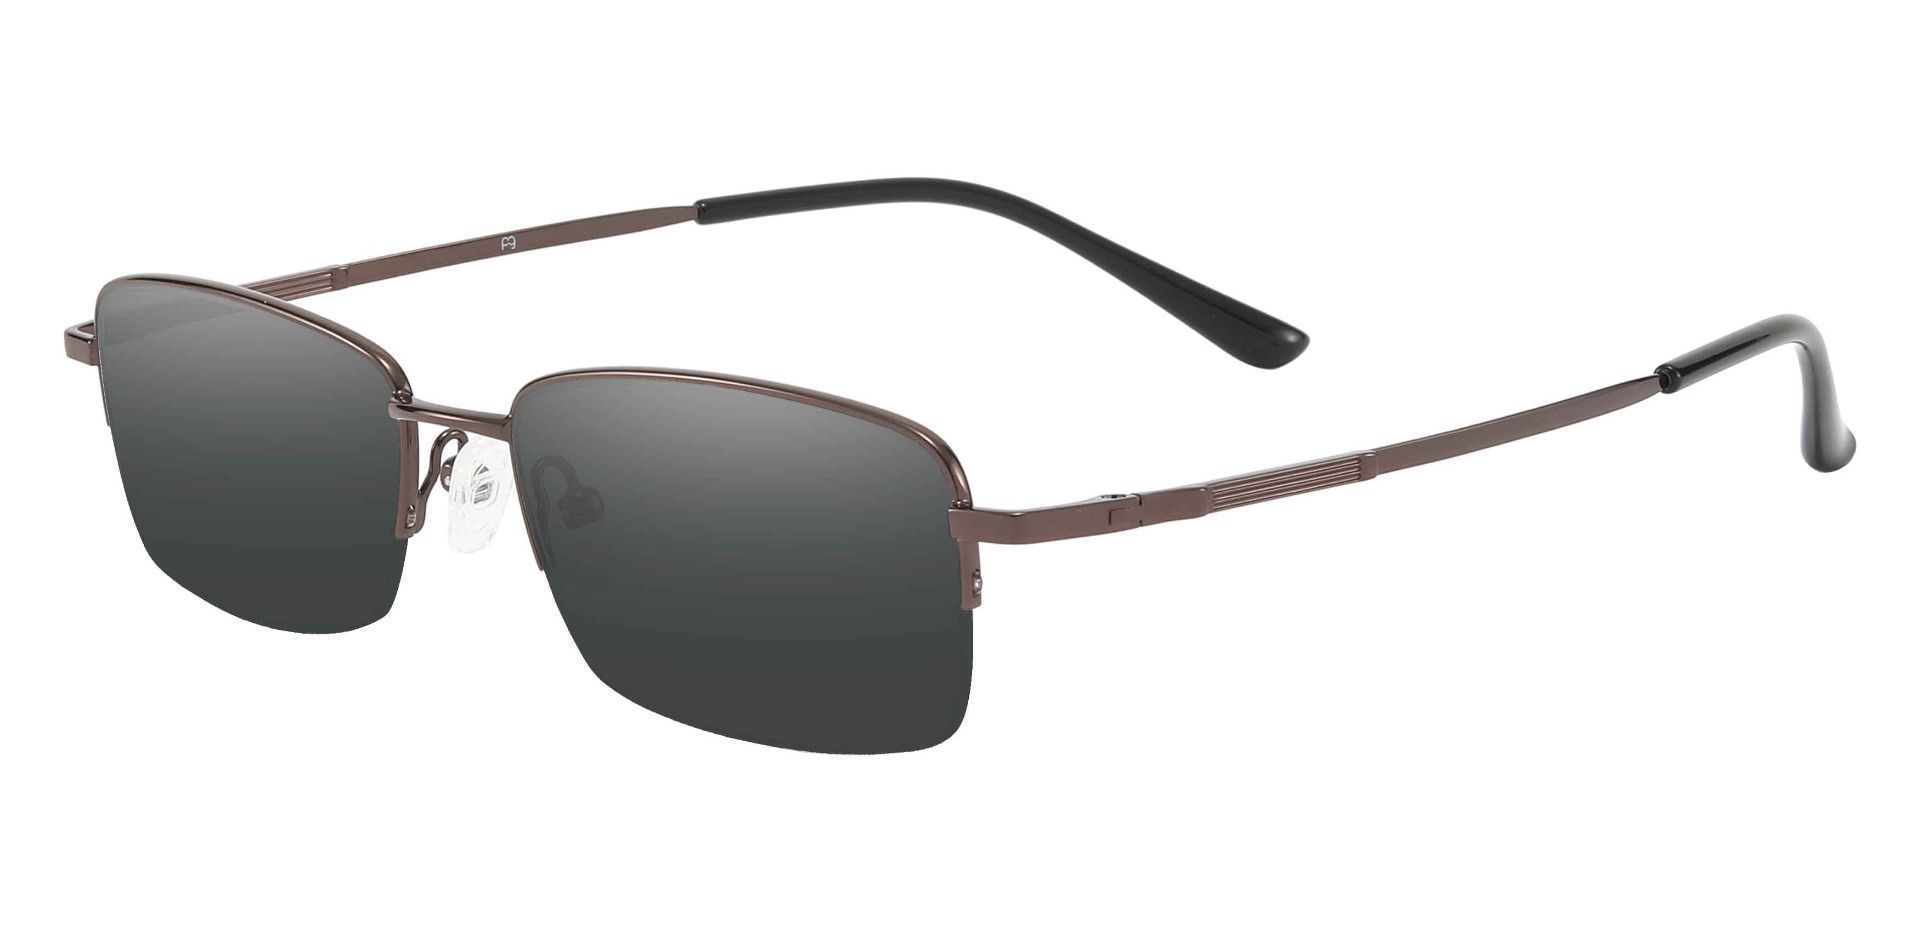 Milford Rectangle Non-Rx Sunglasses - Brown Frame With Gray Lenses